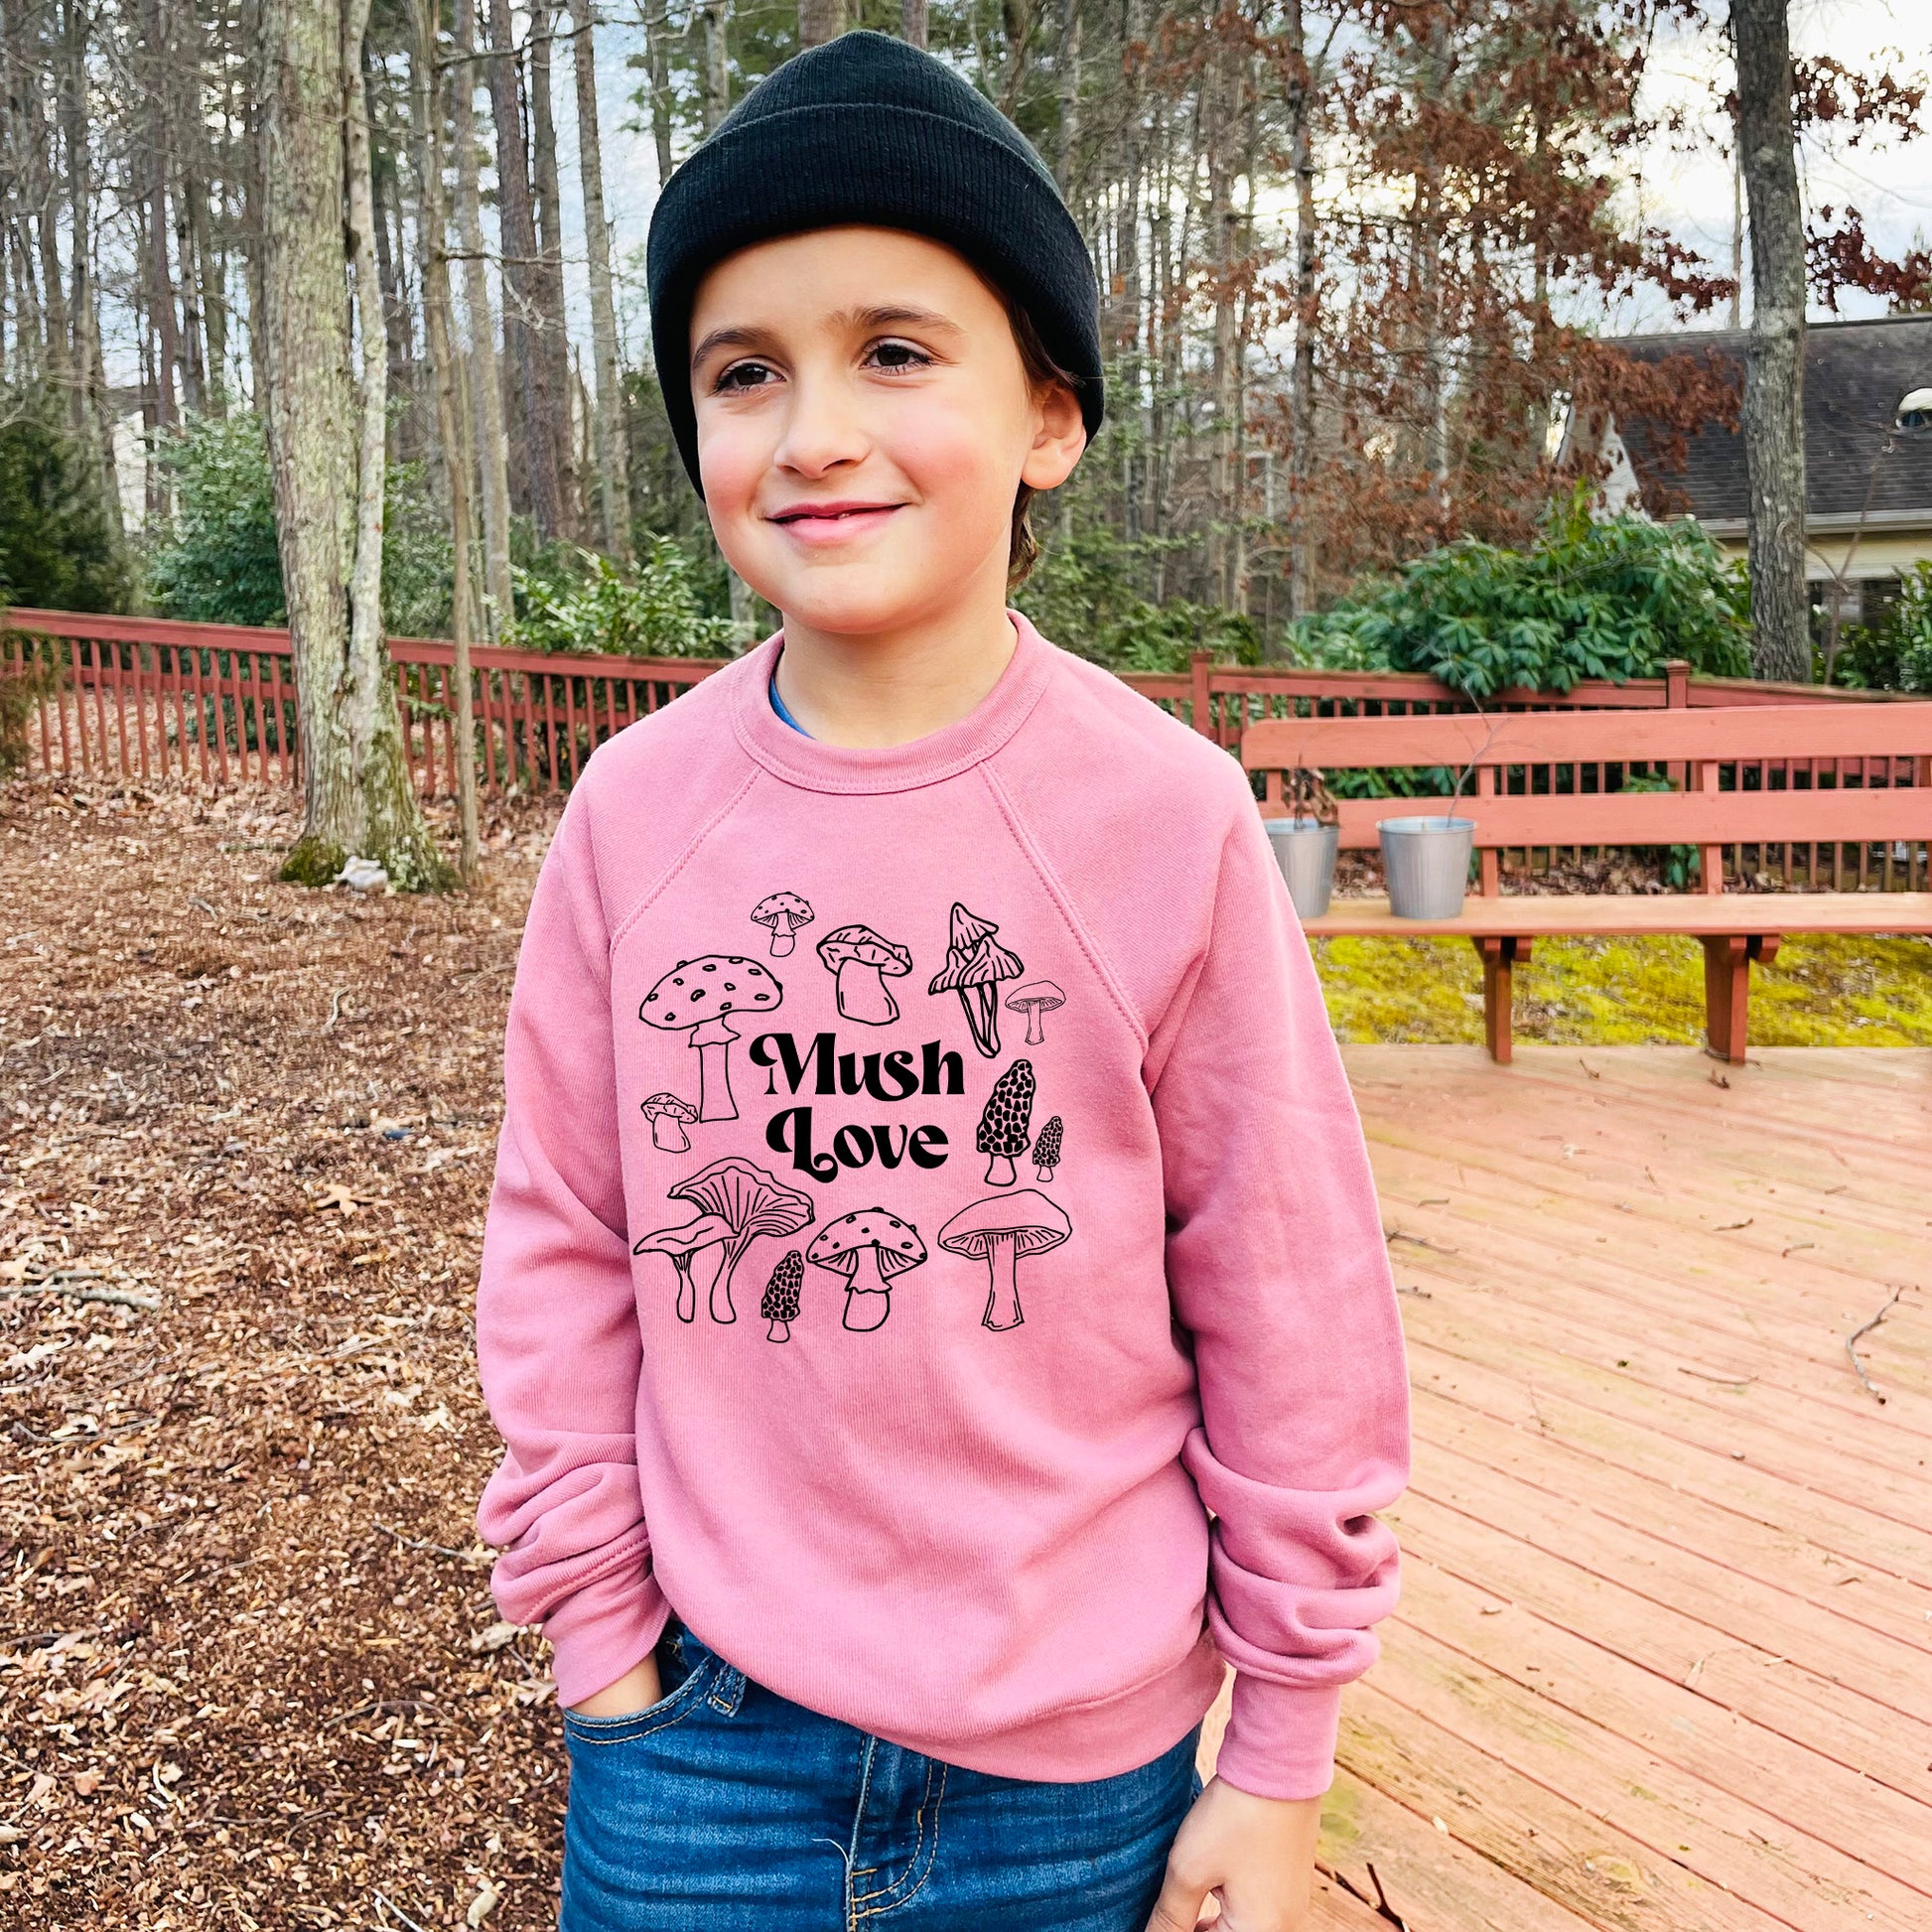 a young boy wearing a pink sweatshirt and a black hat